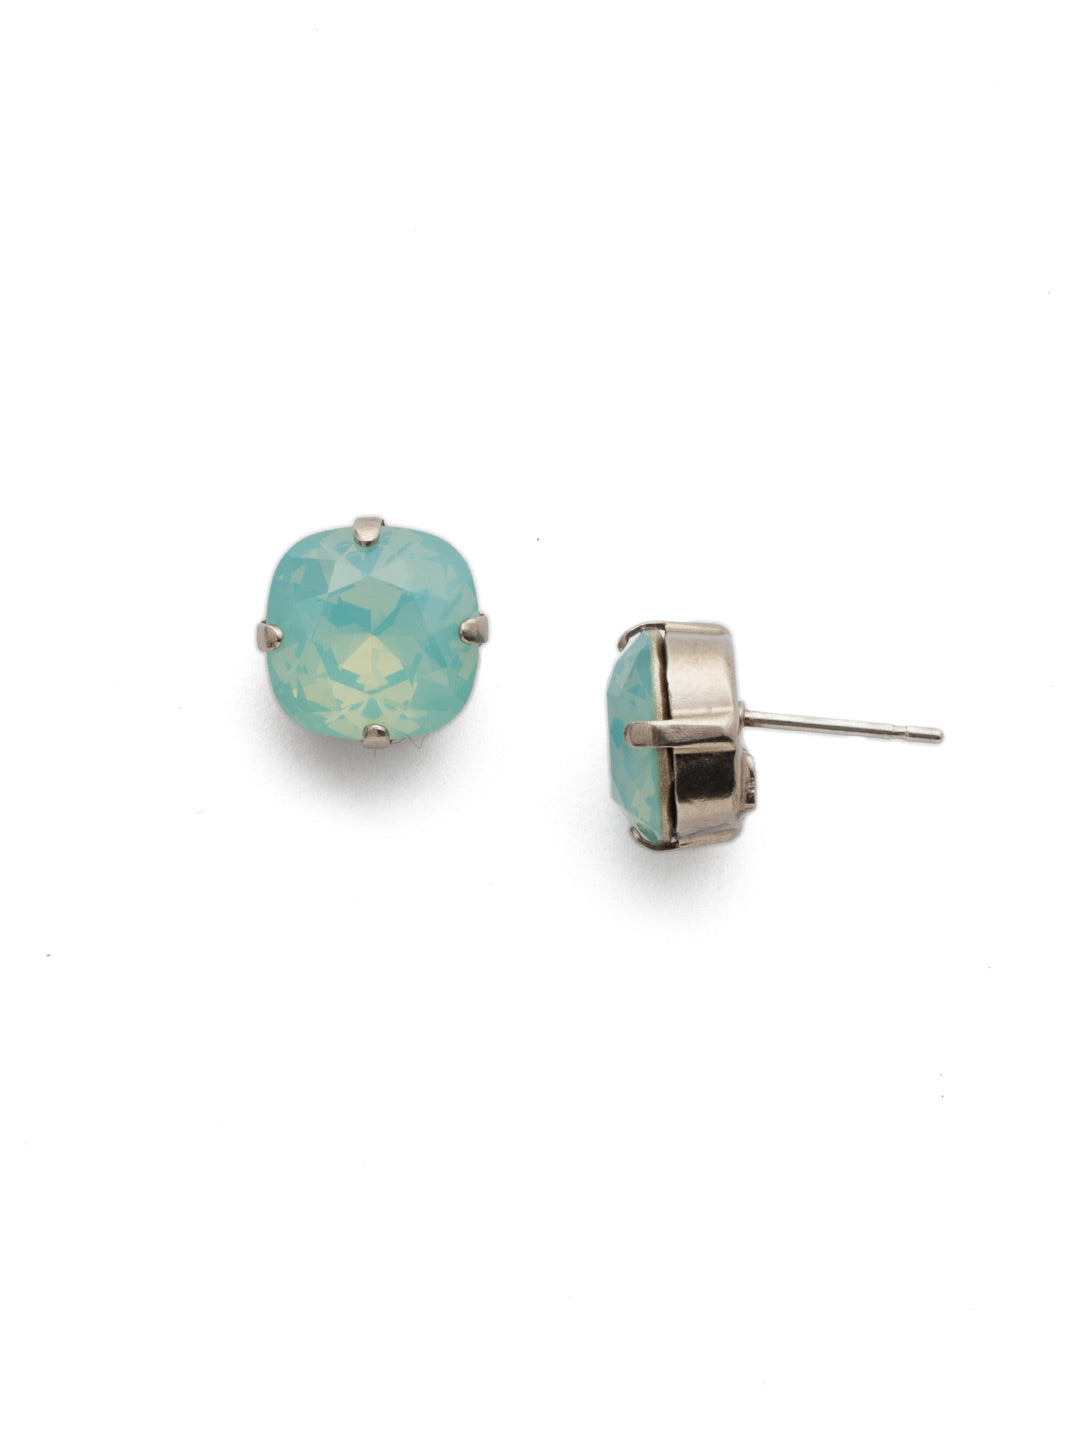 Halcyon Stud Earrings - EDH25ASPAC - <p>A beautiful, luminous cushion-cut crystal in a classic four-pronged setting that's ideal for everyday wear. From Sorrelli's Pacific Opal collection in our Antique Silver-tone finish.</p>